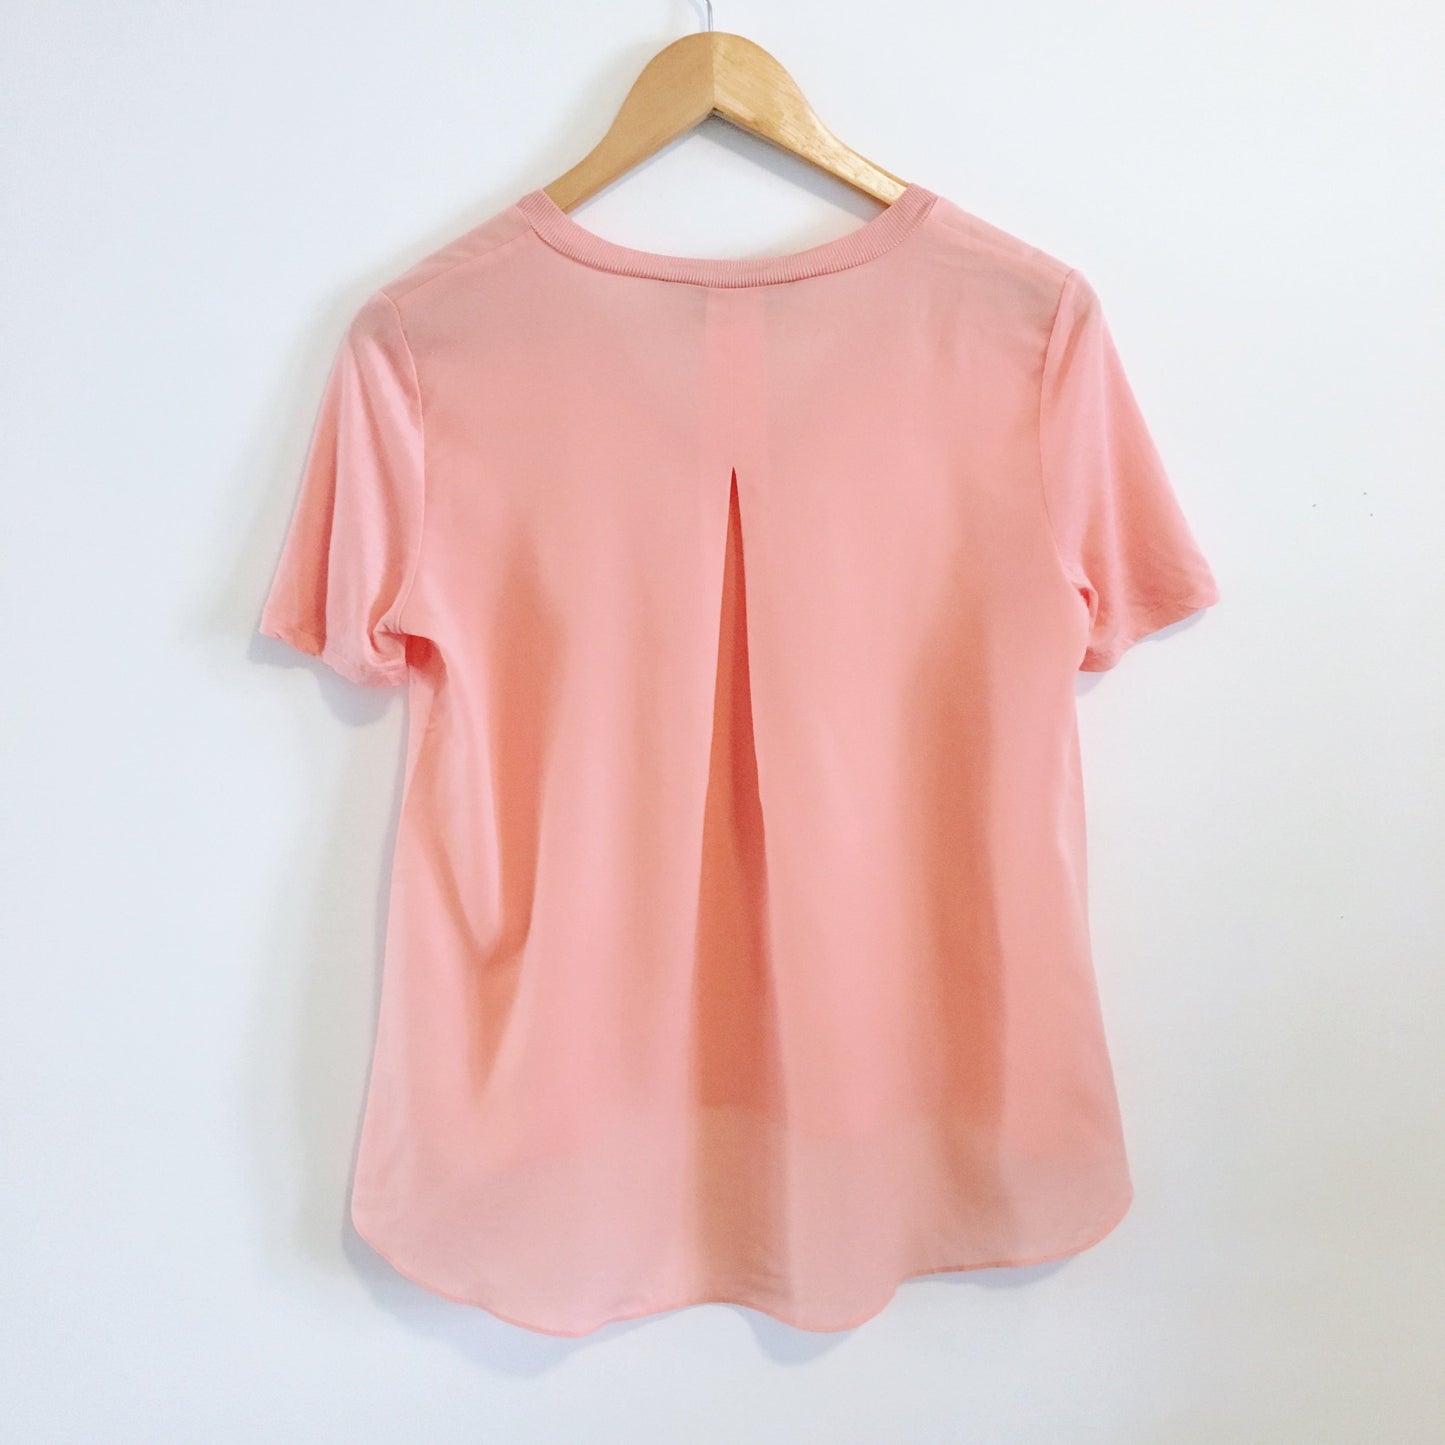 French Connection Coral Blouse Tee - size Small